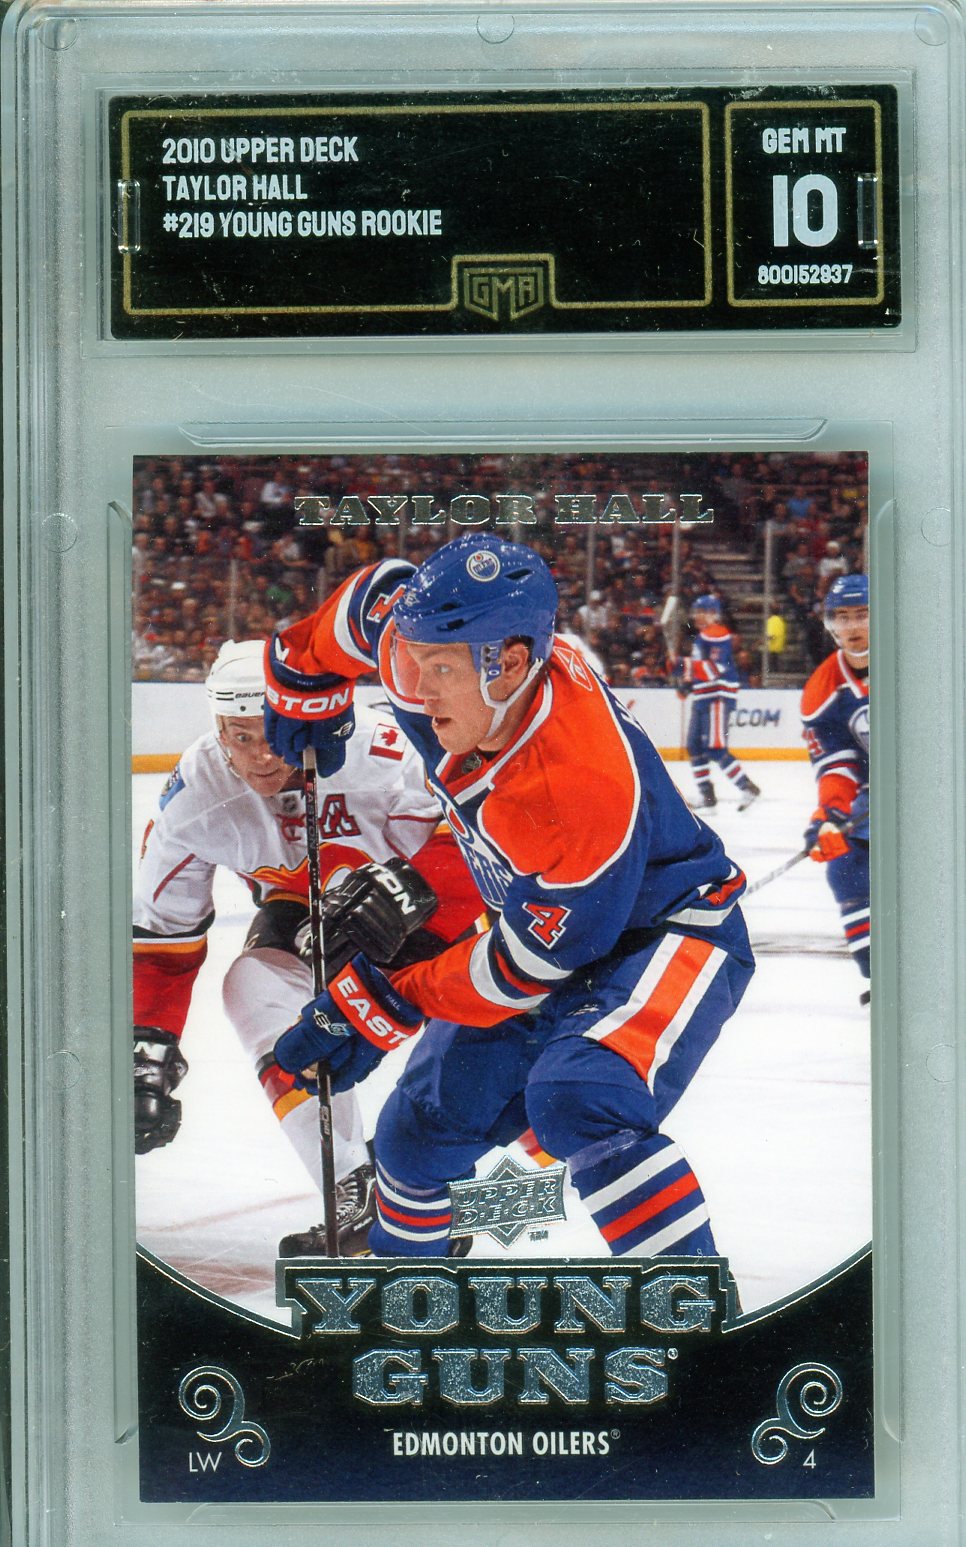 2010 Upper Deck Taylor Hall #219 Young Guns Rookie Card GMA 10